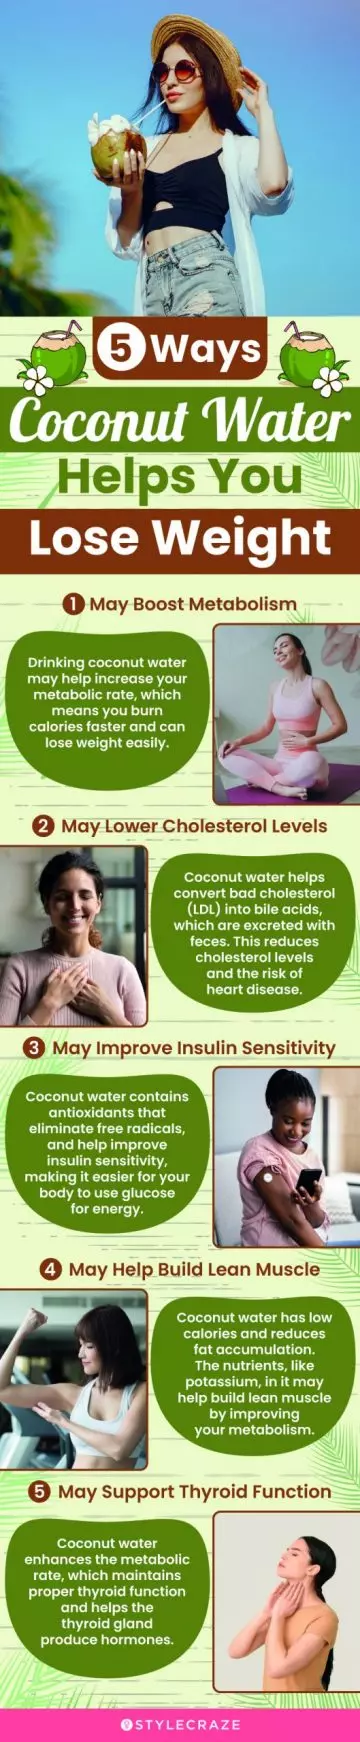 5 ways coconut water helps you lose weight (infographic)